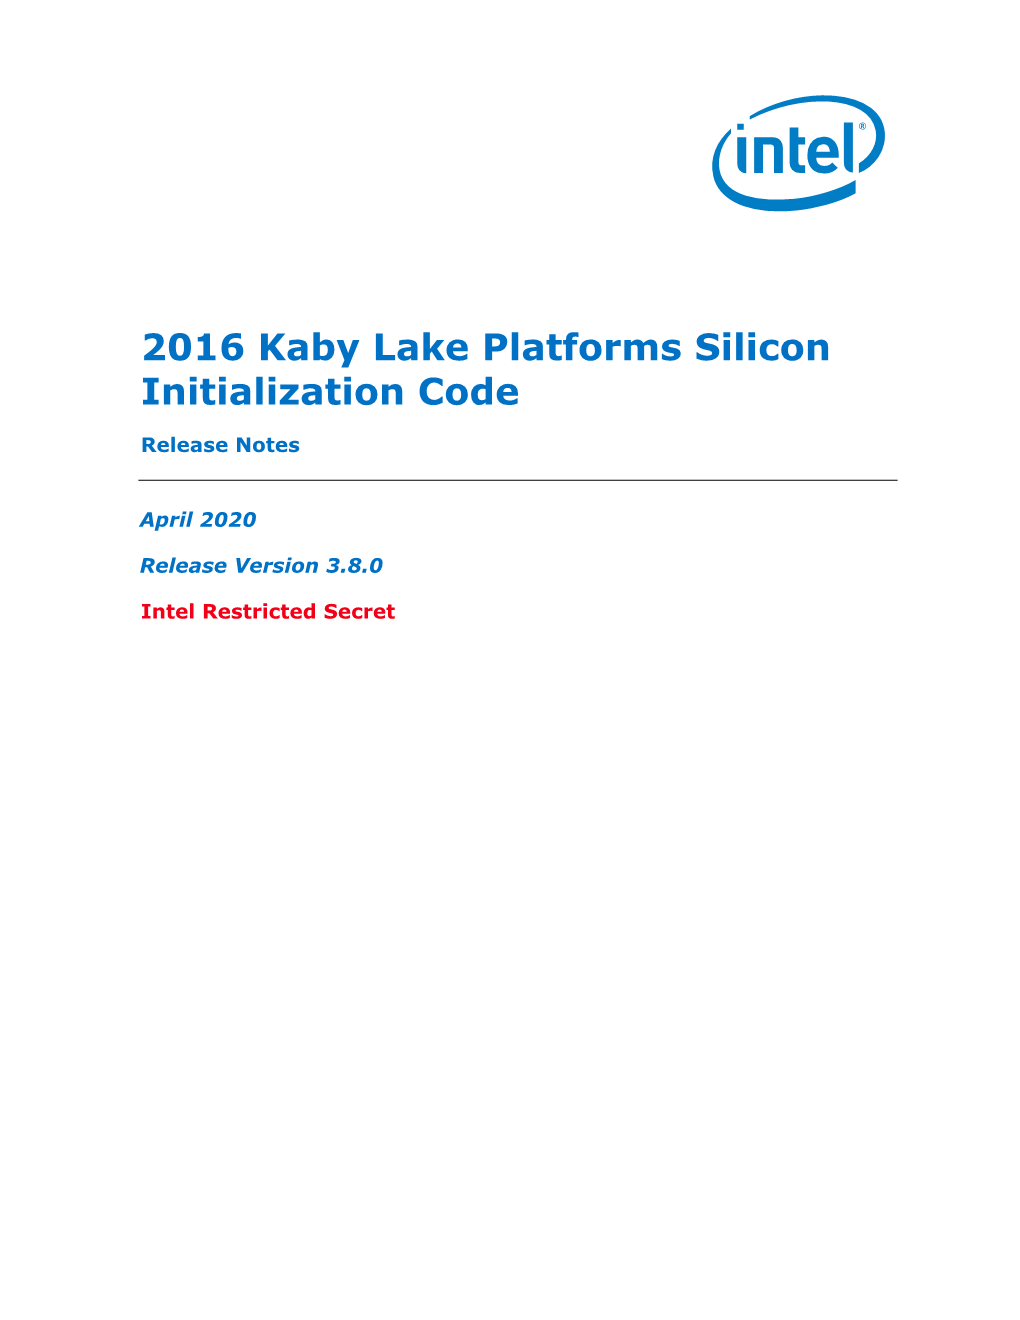 2016 Kaby Lake Platforms Silicon Initialization Code Release Notes Intel Restricted Secret 5